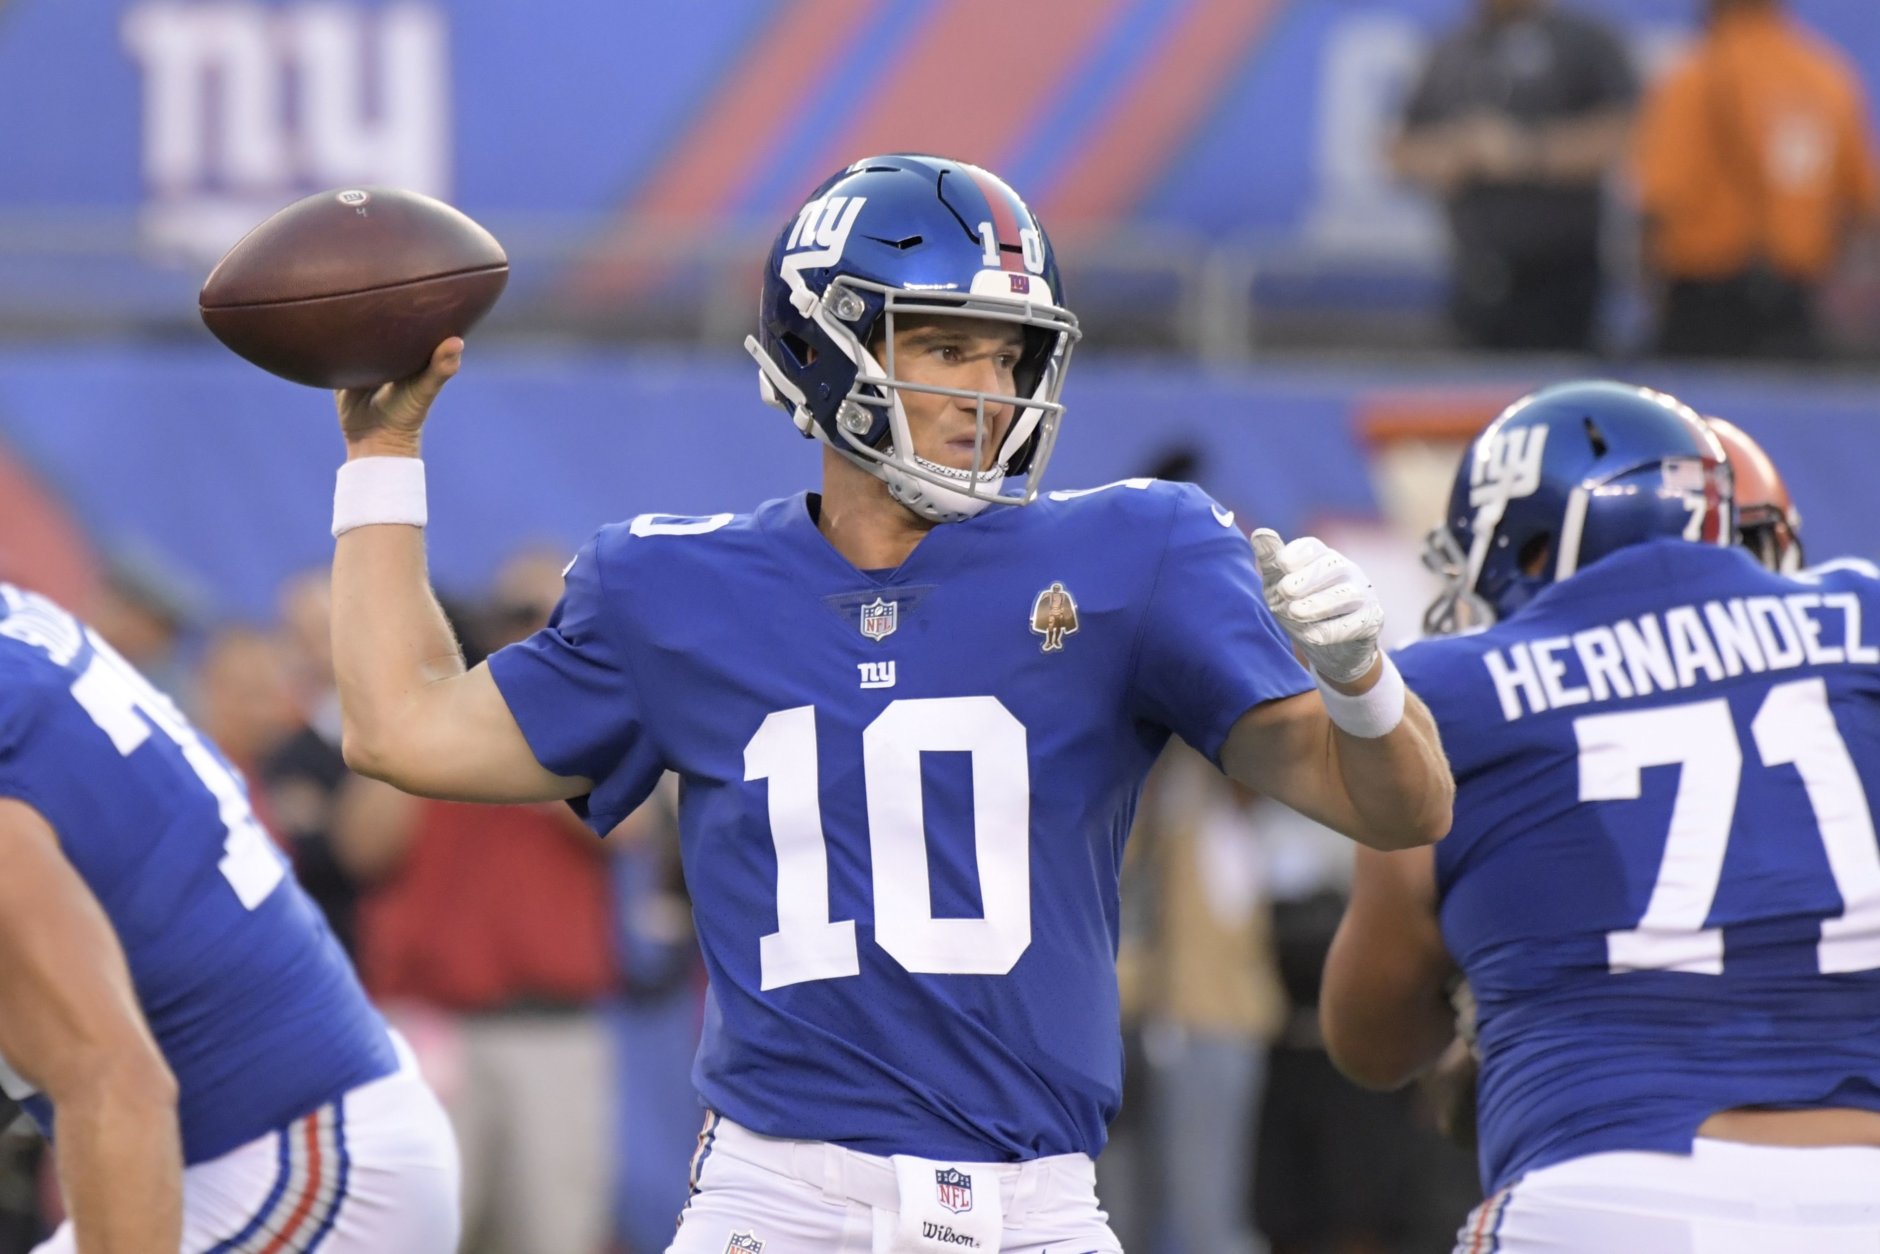 New York Giants quarterback Eli Manning (10) throws a pass during the first half of a preseason NFL football game against the Cleveland Browns Thursday, Aug. 9, 2018, in East Rutherford, N.J. (AP Photo/Bill Kostroun)